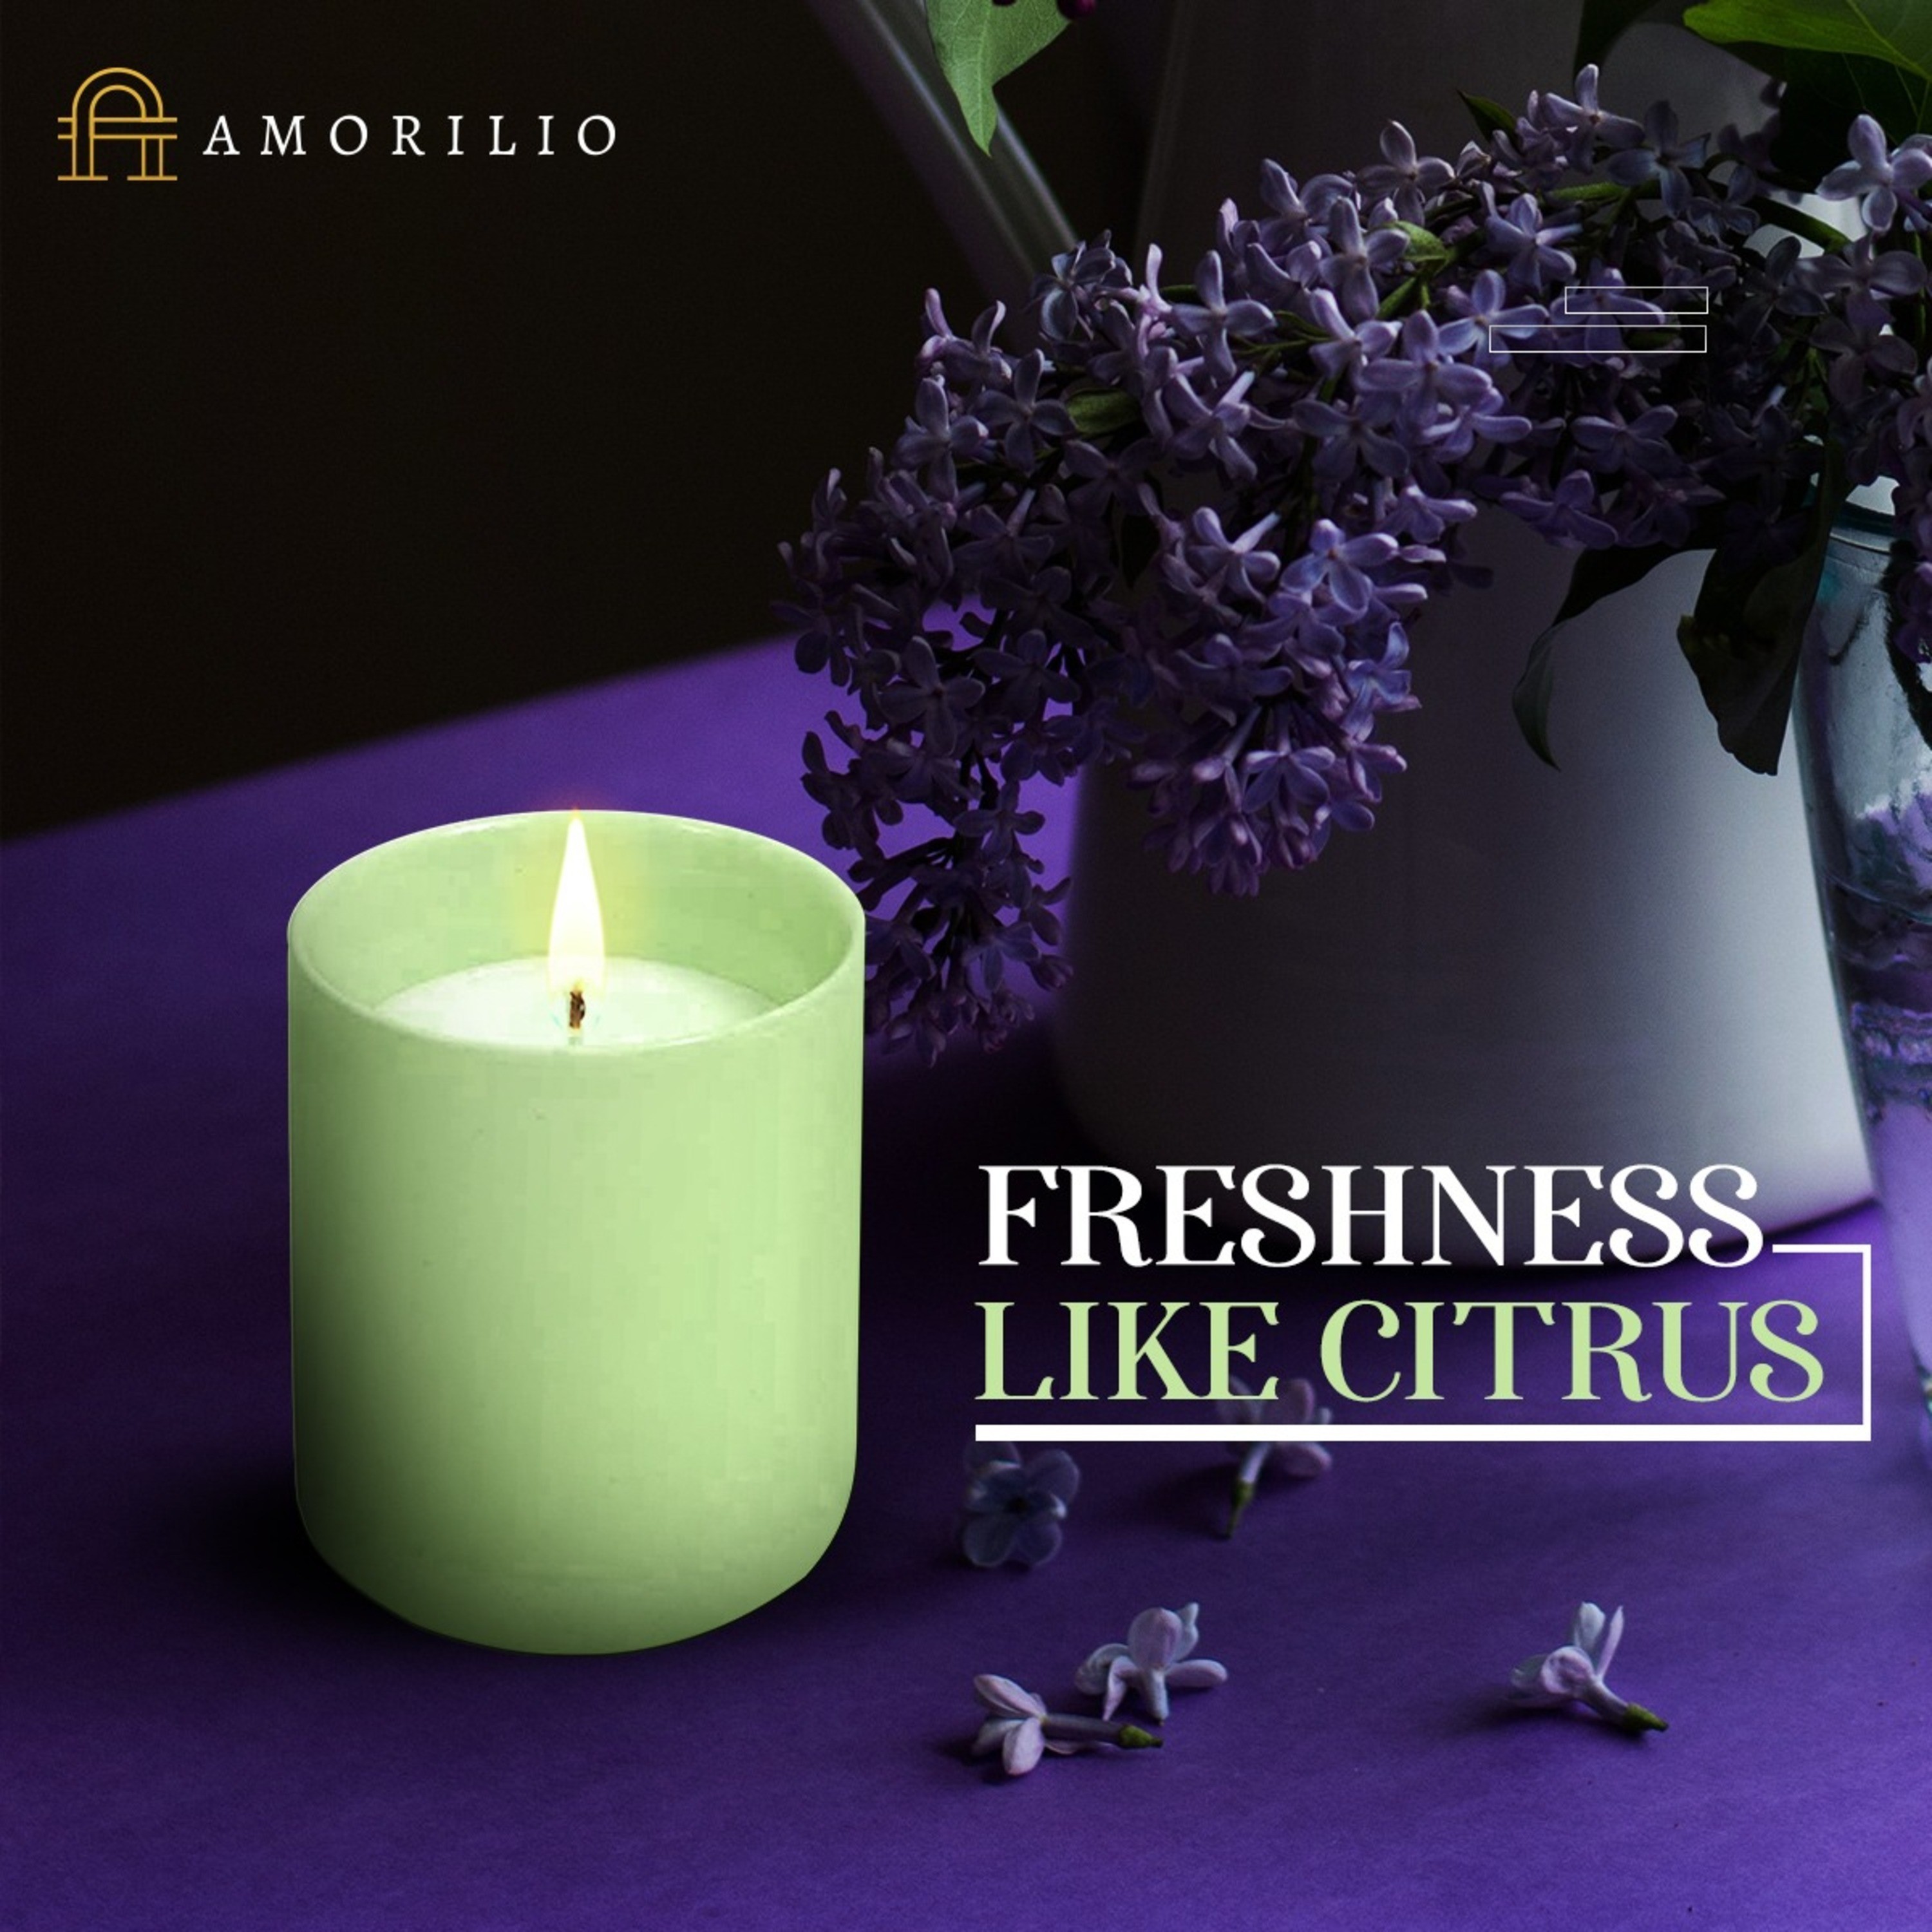 Light Up Your Home With Scented Candles